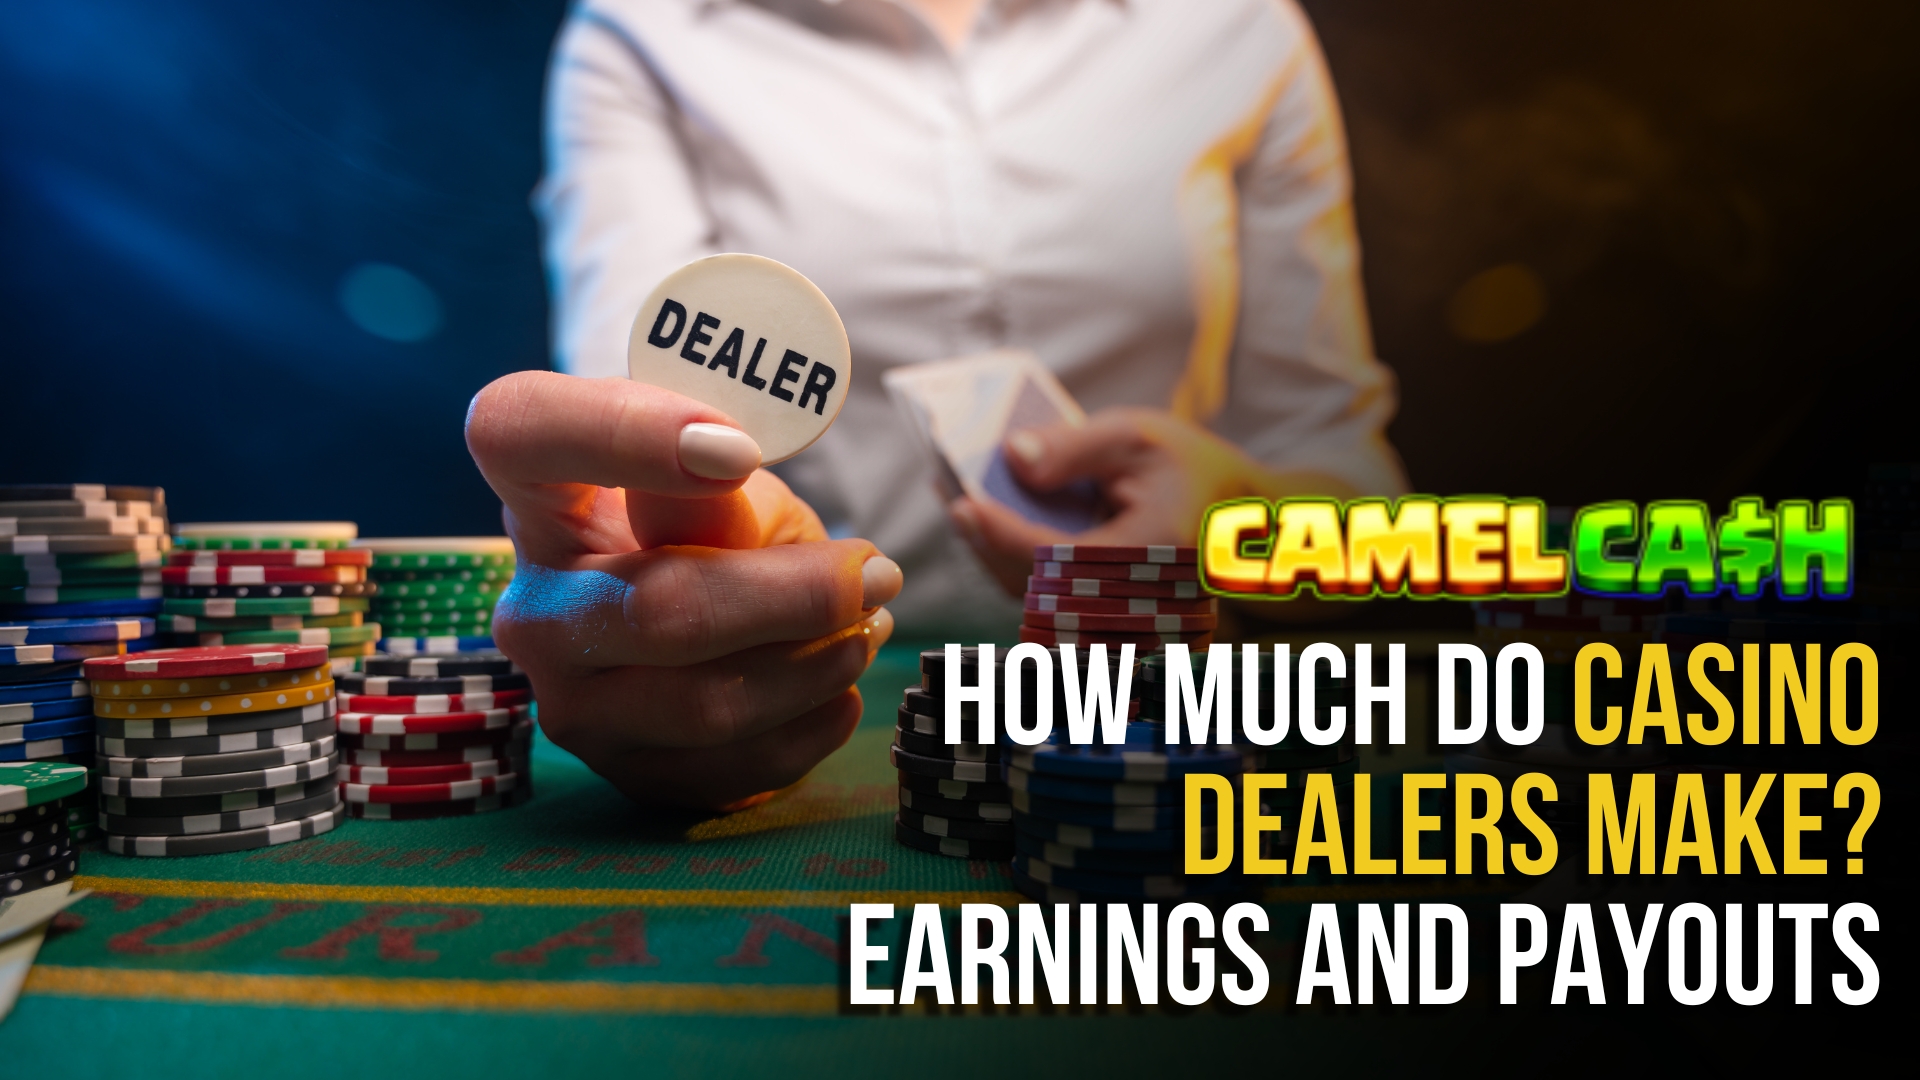 How Much Do Casino Dealers Make? Earnings and Payouts